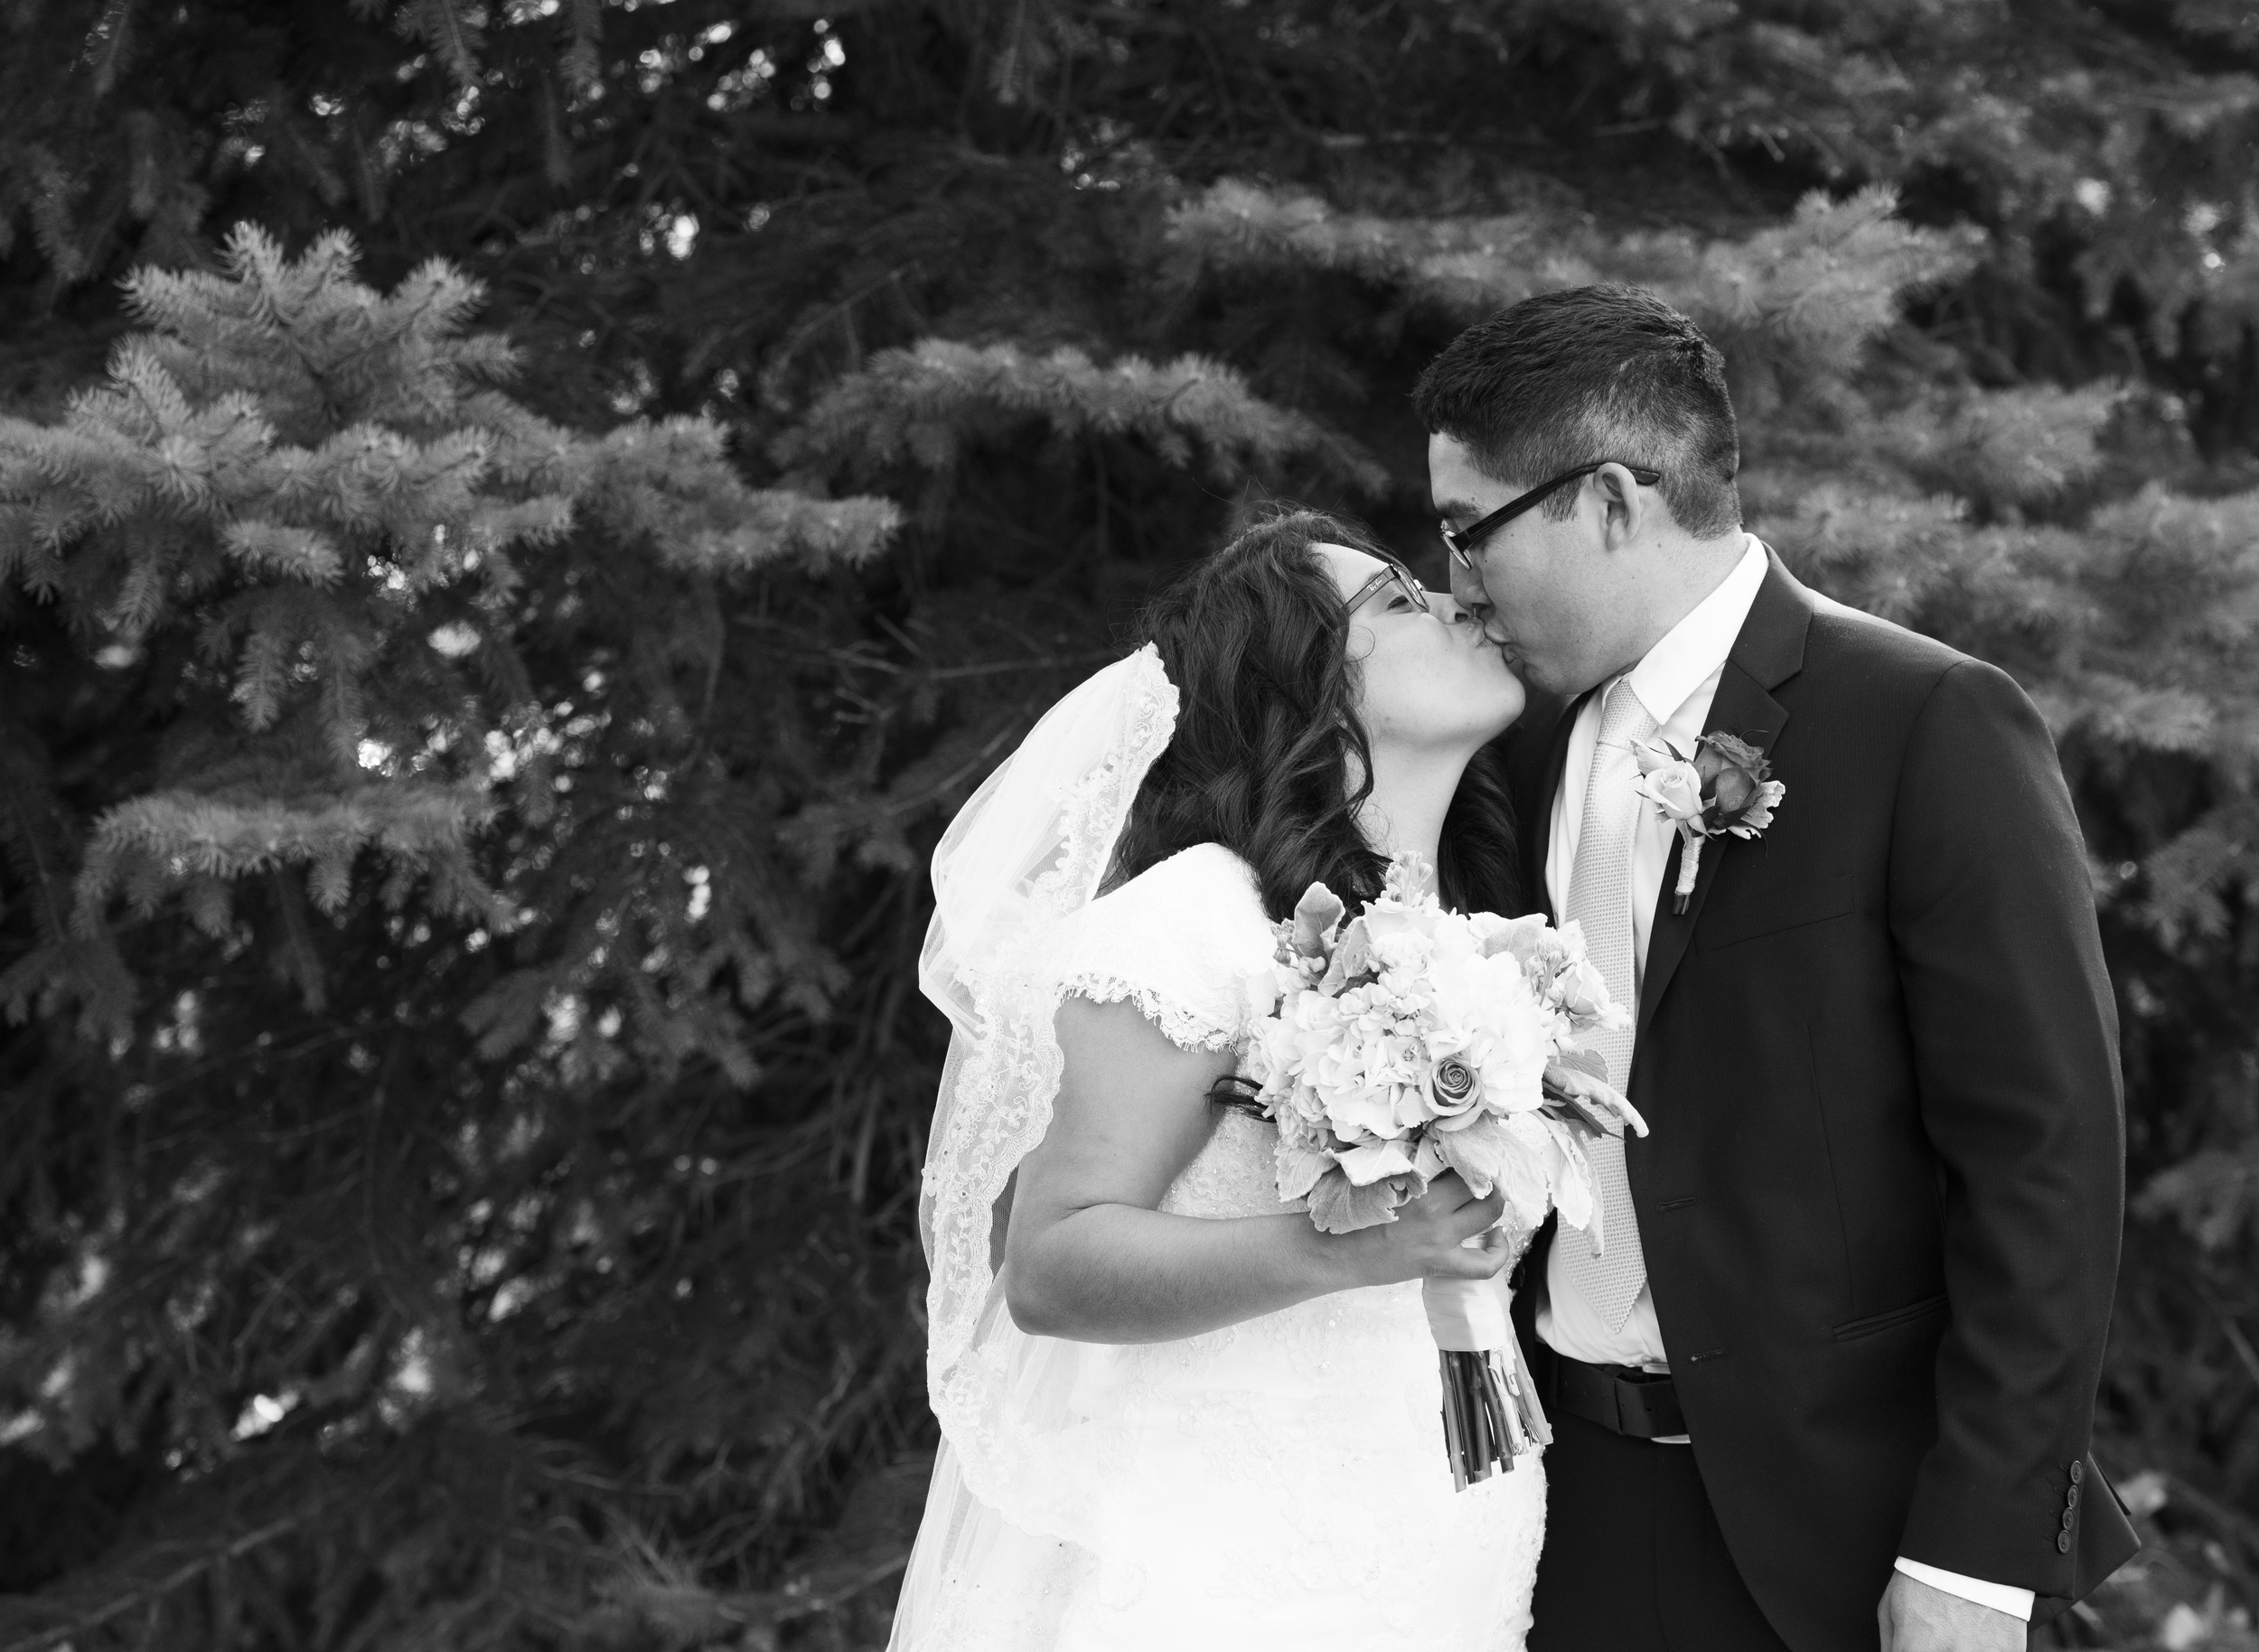 Black and White Photo of the Bride and Groom kissing in profile while the bride holds her bouquet.  Timpanogos Utah Copyright 2016 InTheLoupePhotography